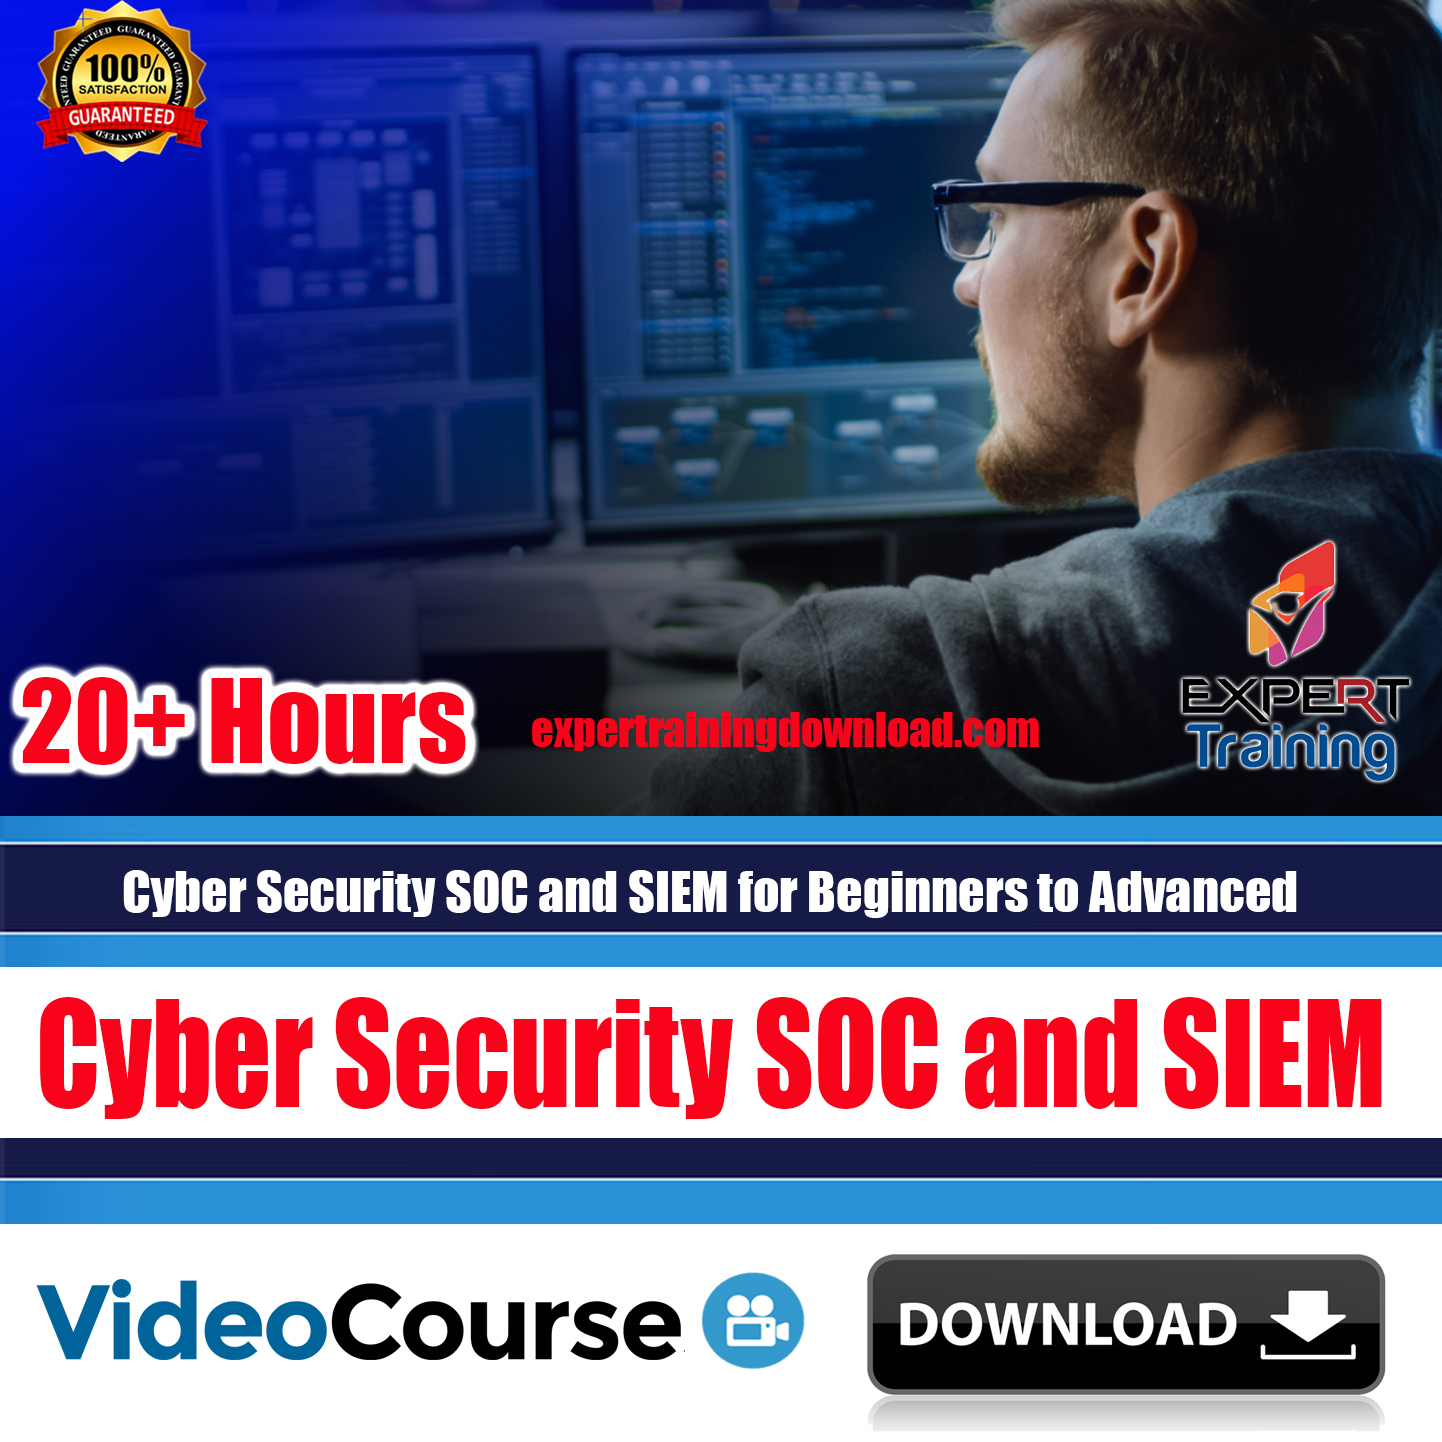 Cyber Security SOC and SIEM for Beginners to Advanced